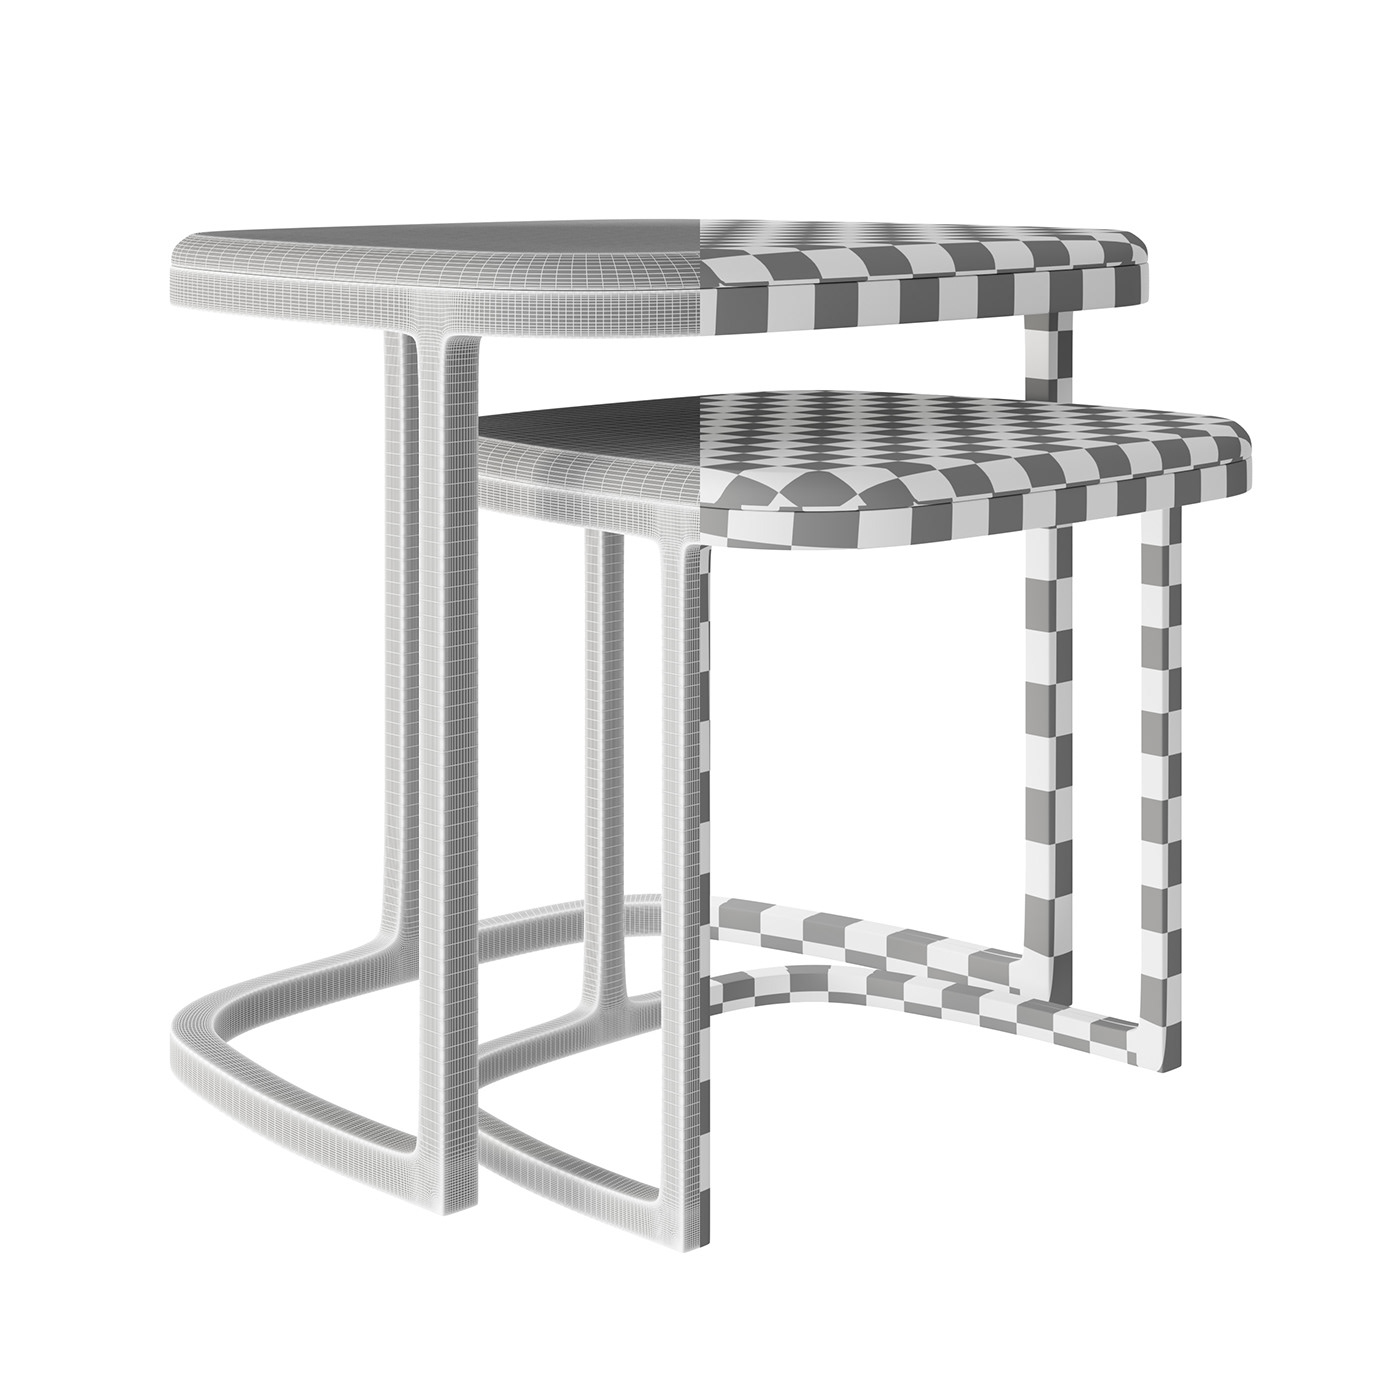 coffee table furniture design  table product design  3d modeling visualization interior design 